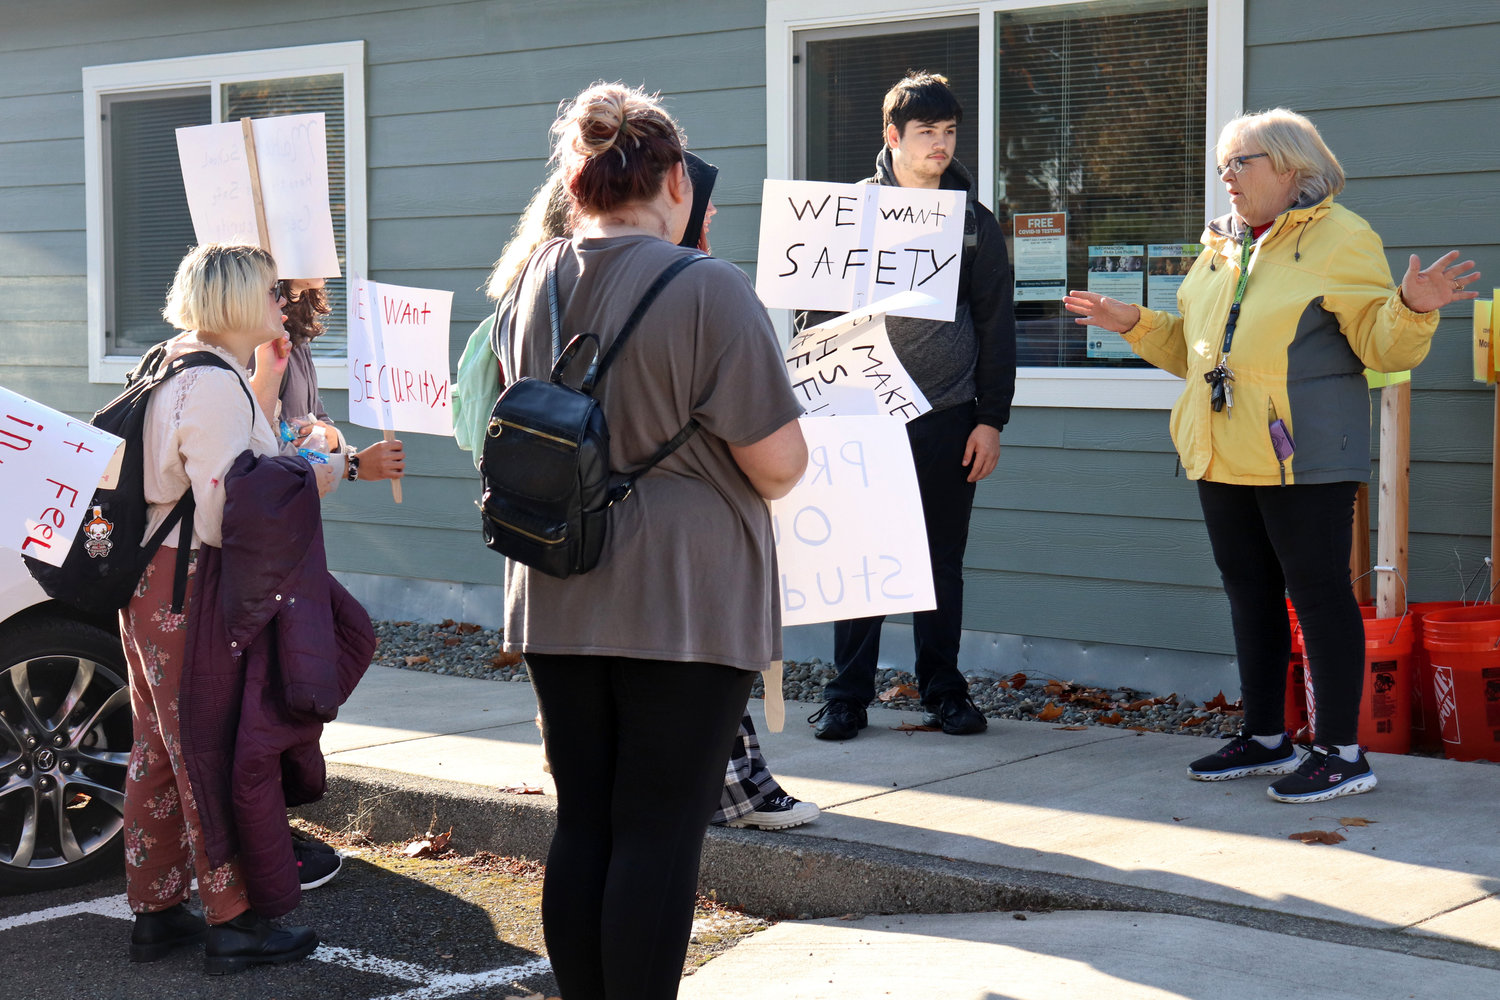 Centralia High School senior Dante Higgens stands beside his grandmother, Judy Anderson, at left, in front of the Centralia School District Administration Office during a protest over safety and security concerns on Thursday.